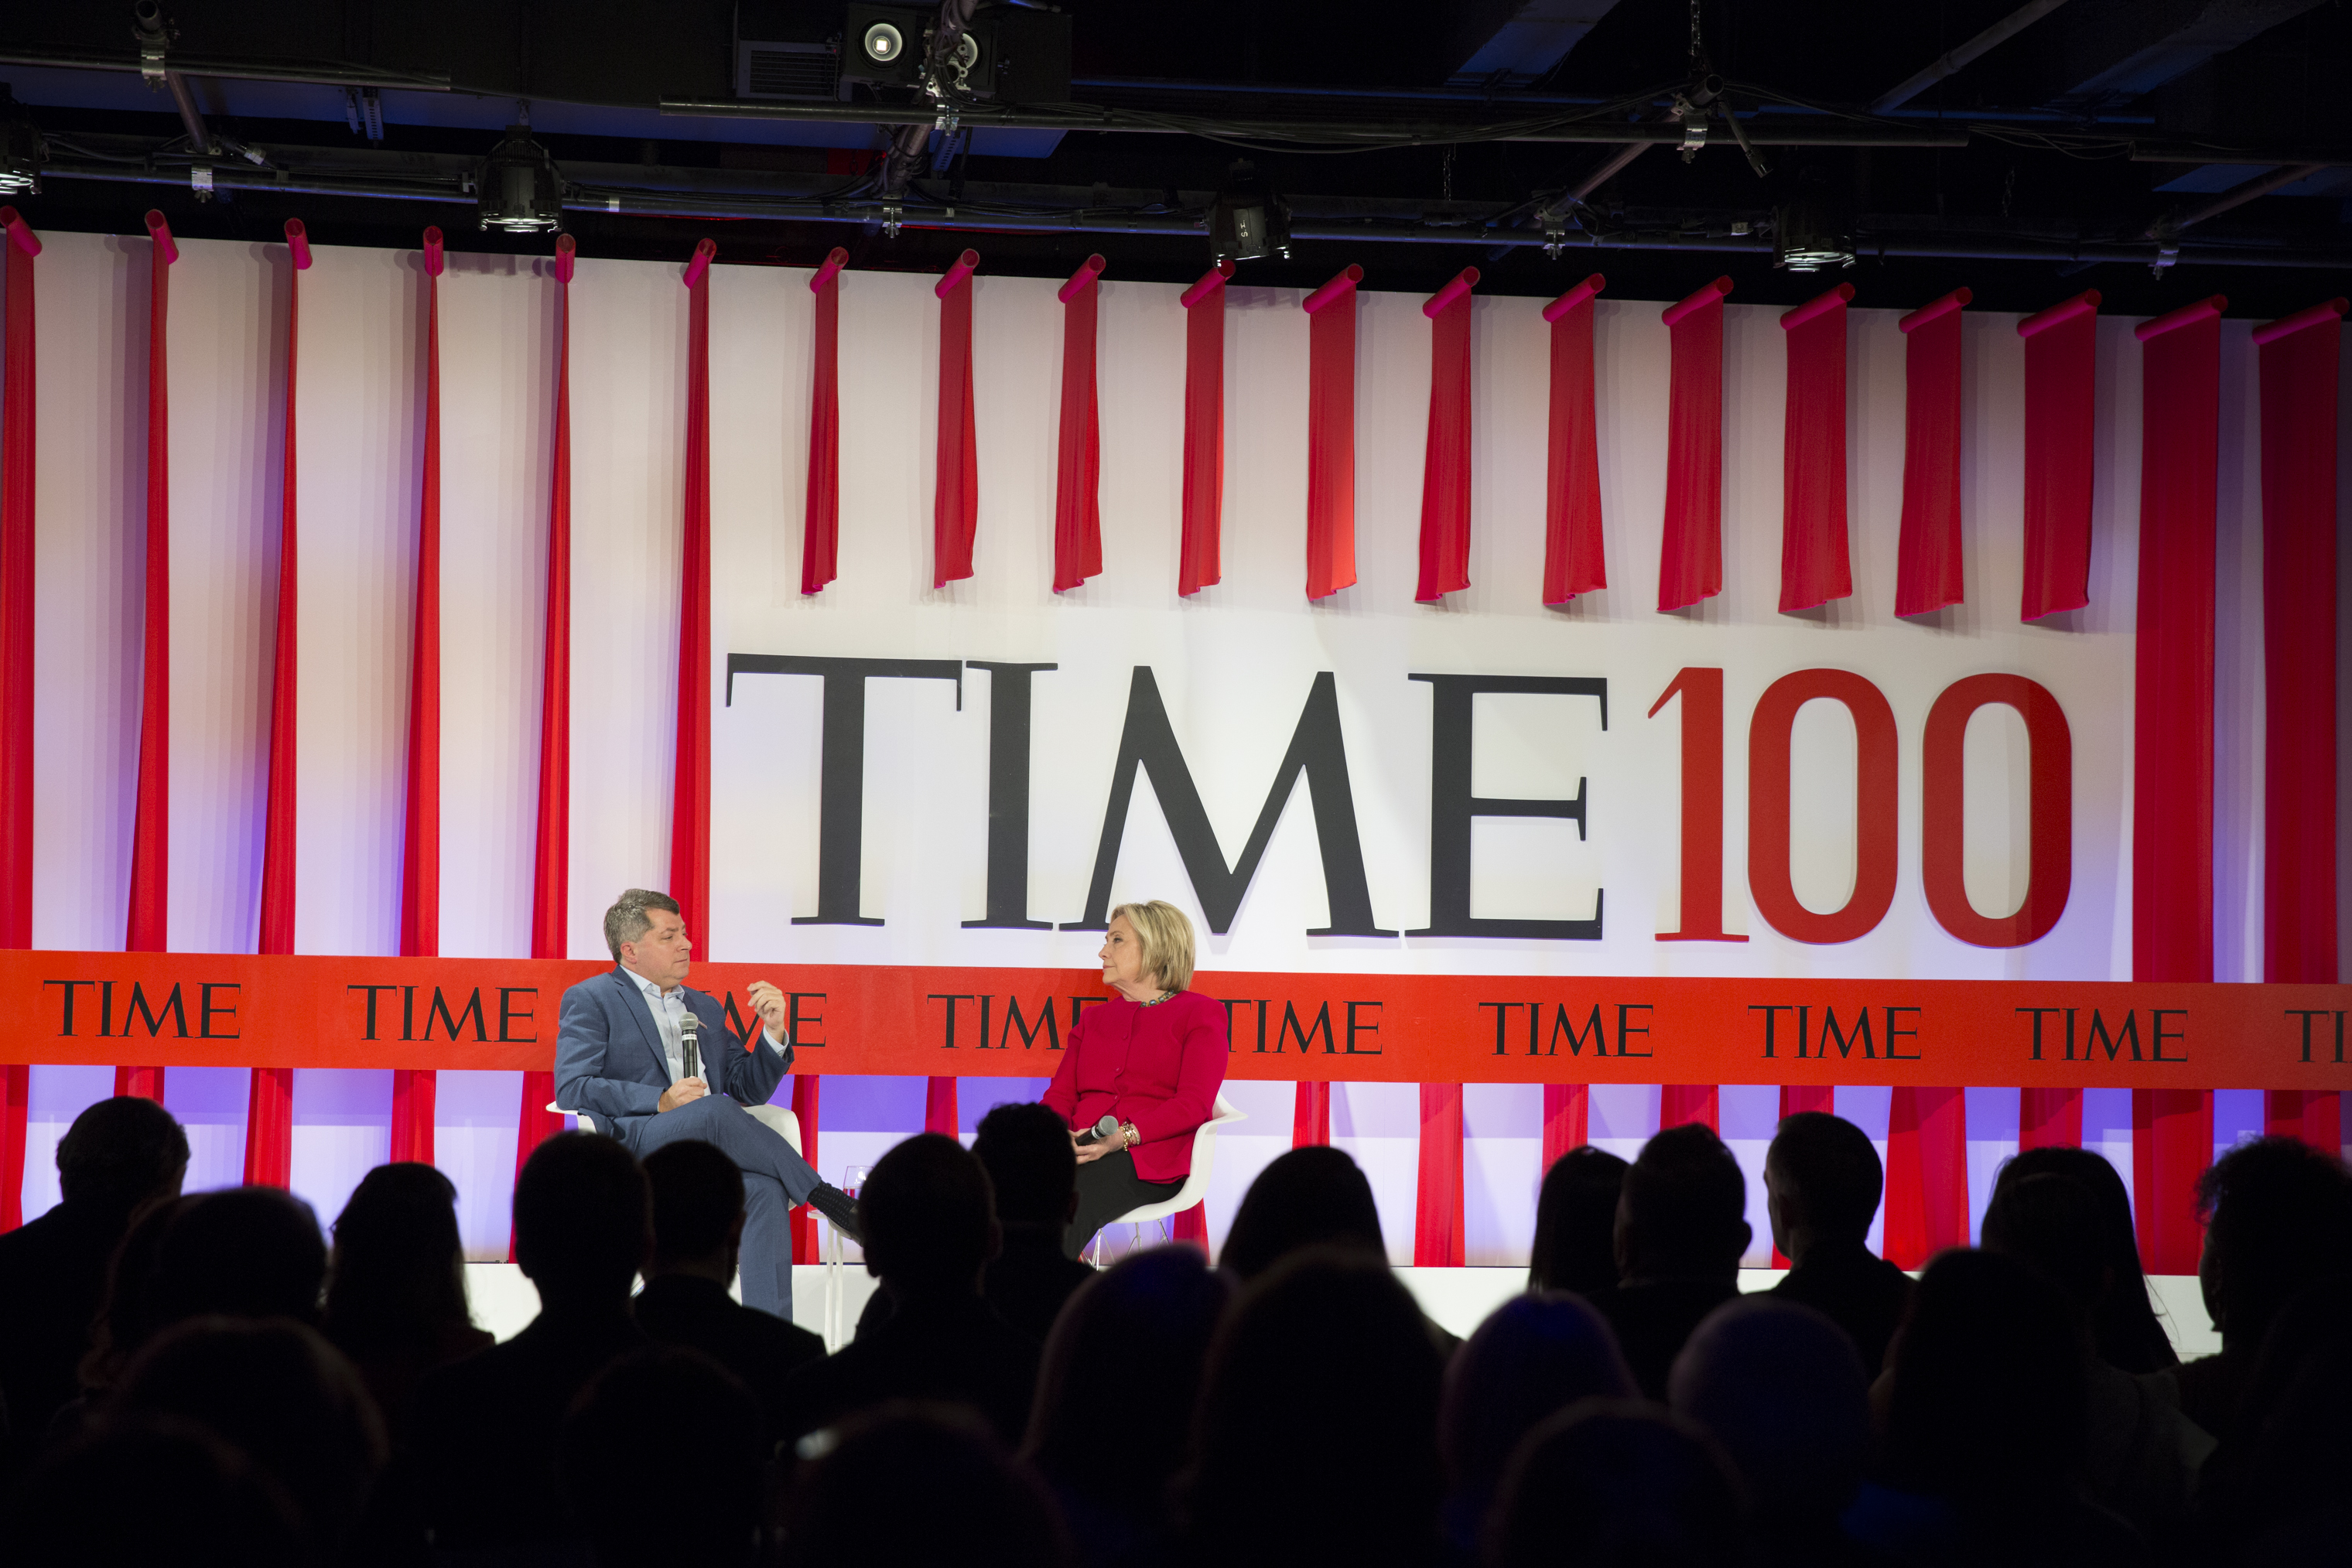 Former U.S. Secretary of State Hillary Clinton talks to Editor-in-Chief and CEO of TIME Edward Felsenthal about creating a better future  at the TIME 100 Summit in New York, on April 23, 2019. (Krisanne Johnson for TIME)